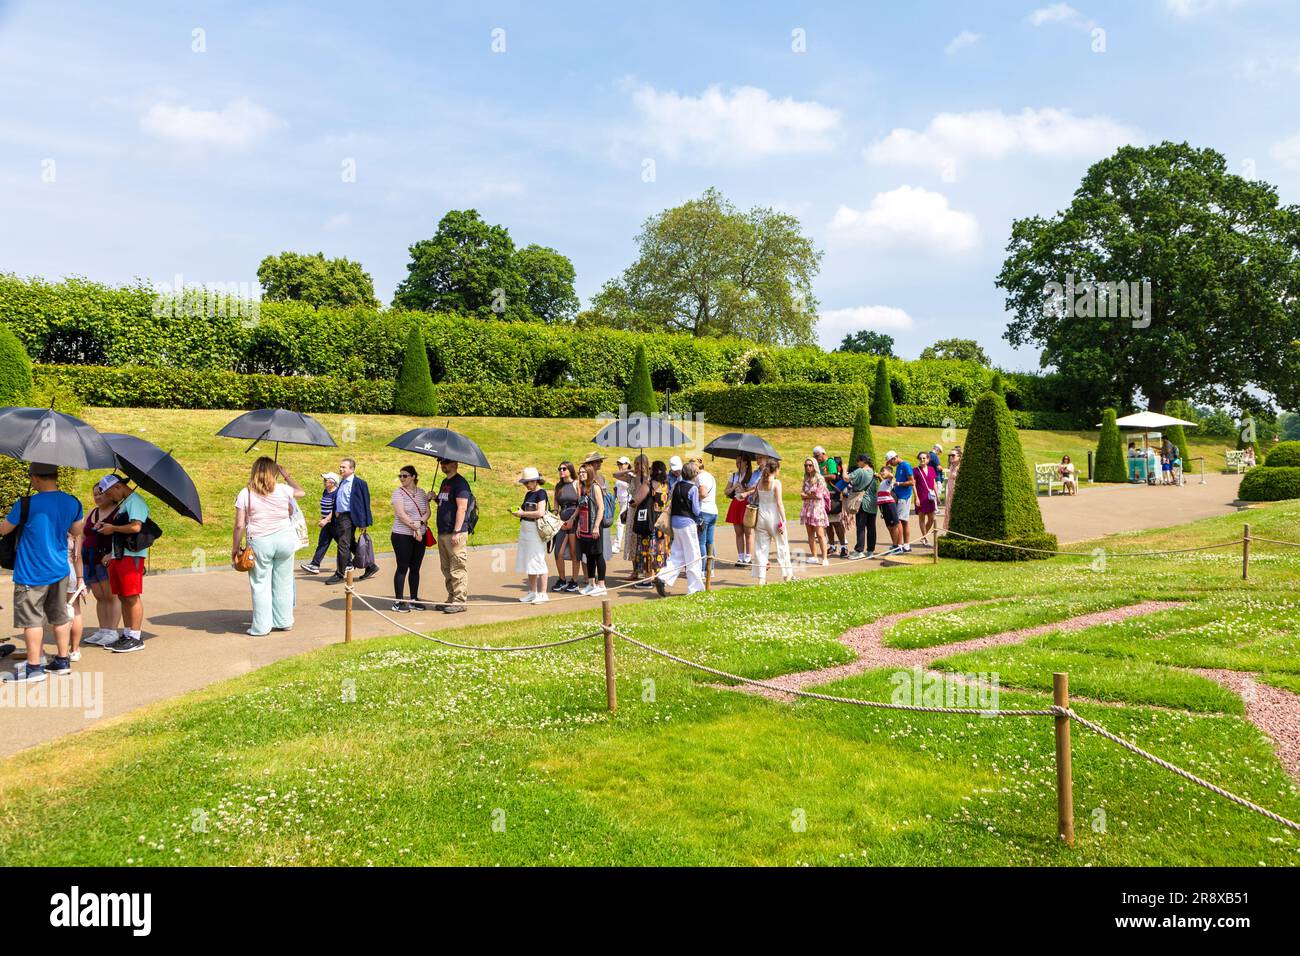 Tourists with umbrellas on a hot summer day waiting in queue to Kensington Palace, London, England, UK Stock Photo